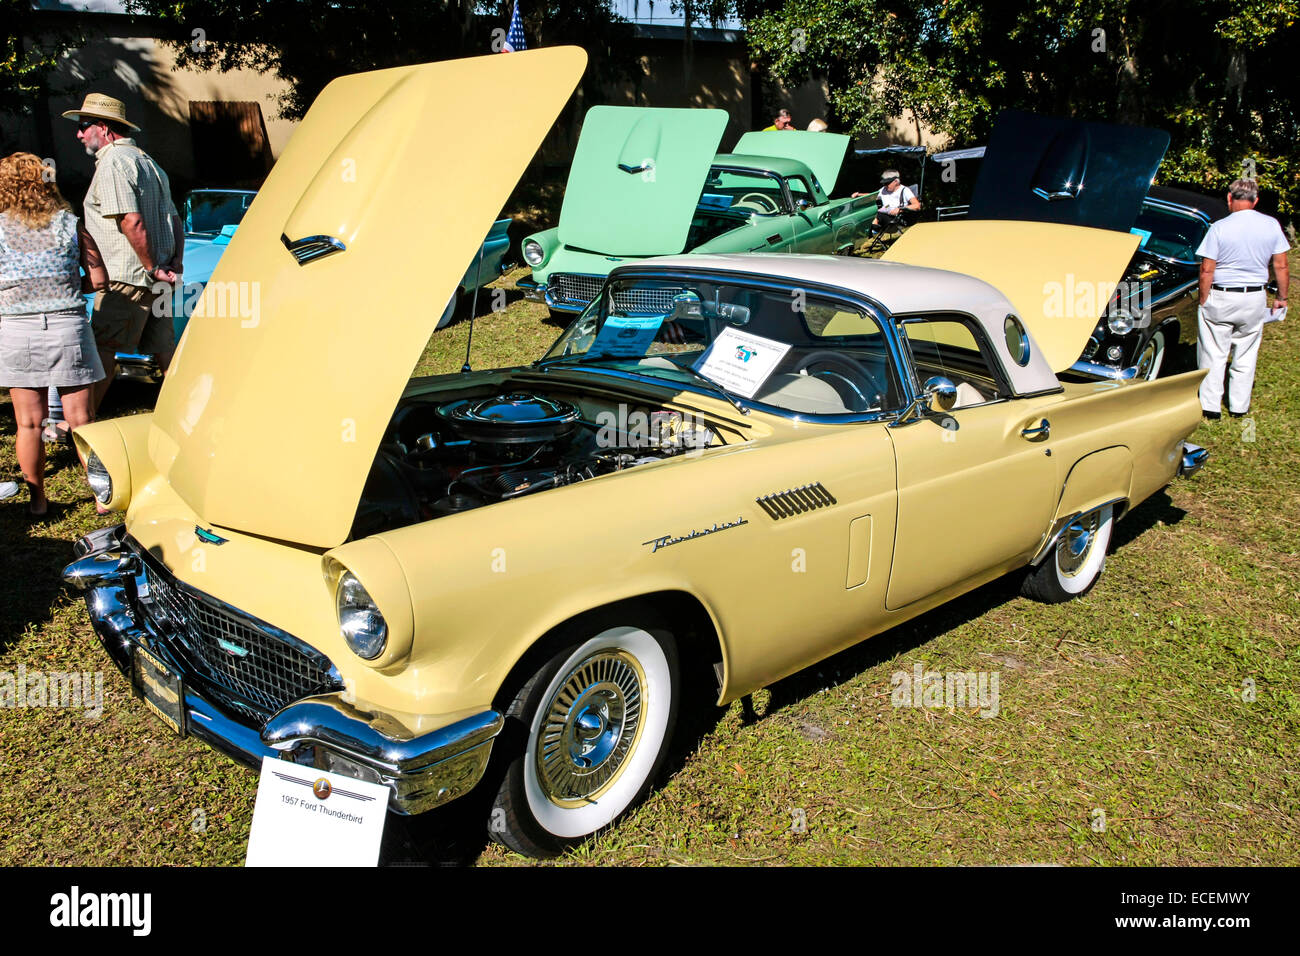 1957 Yellow Ford Thunderbird car on display at a vintage vehicle show in S. Florida Stock Photo